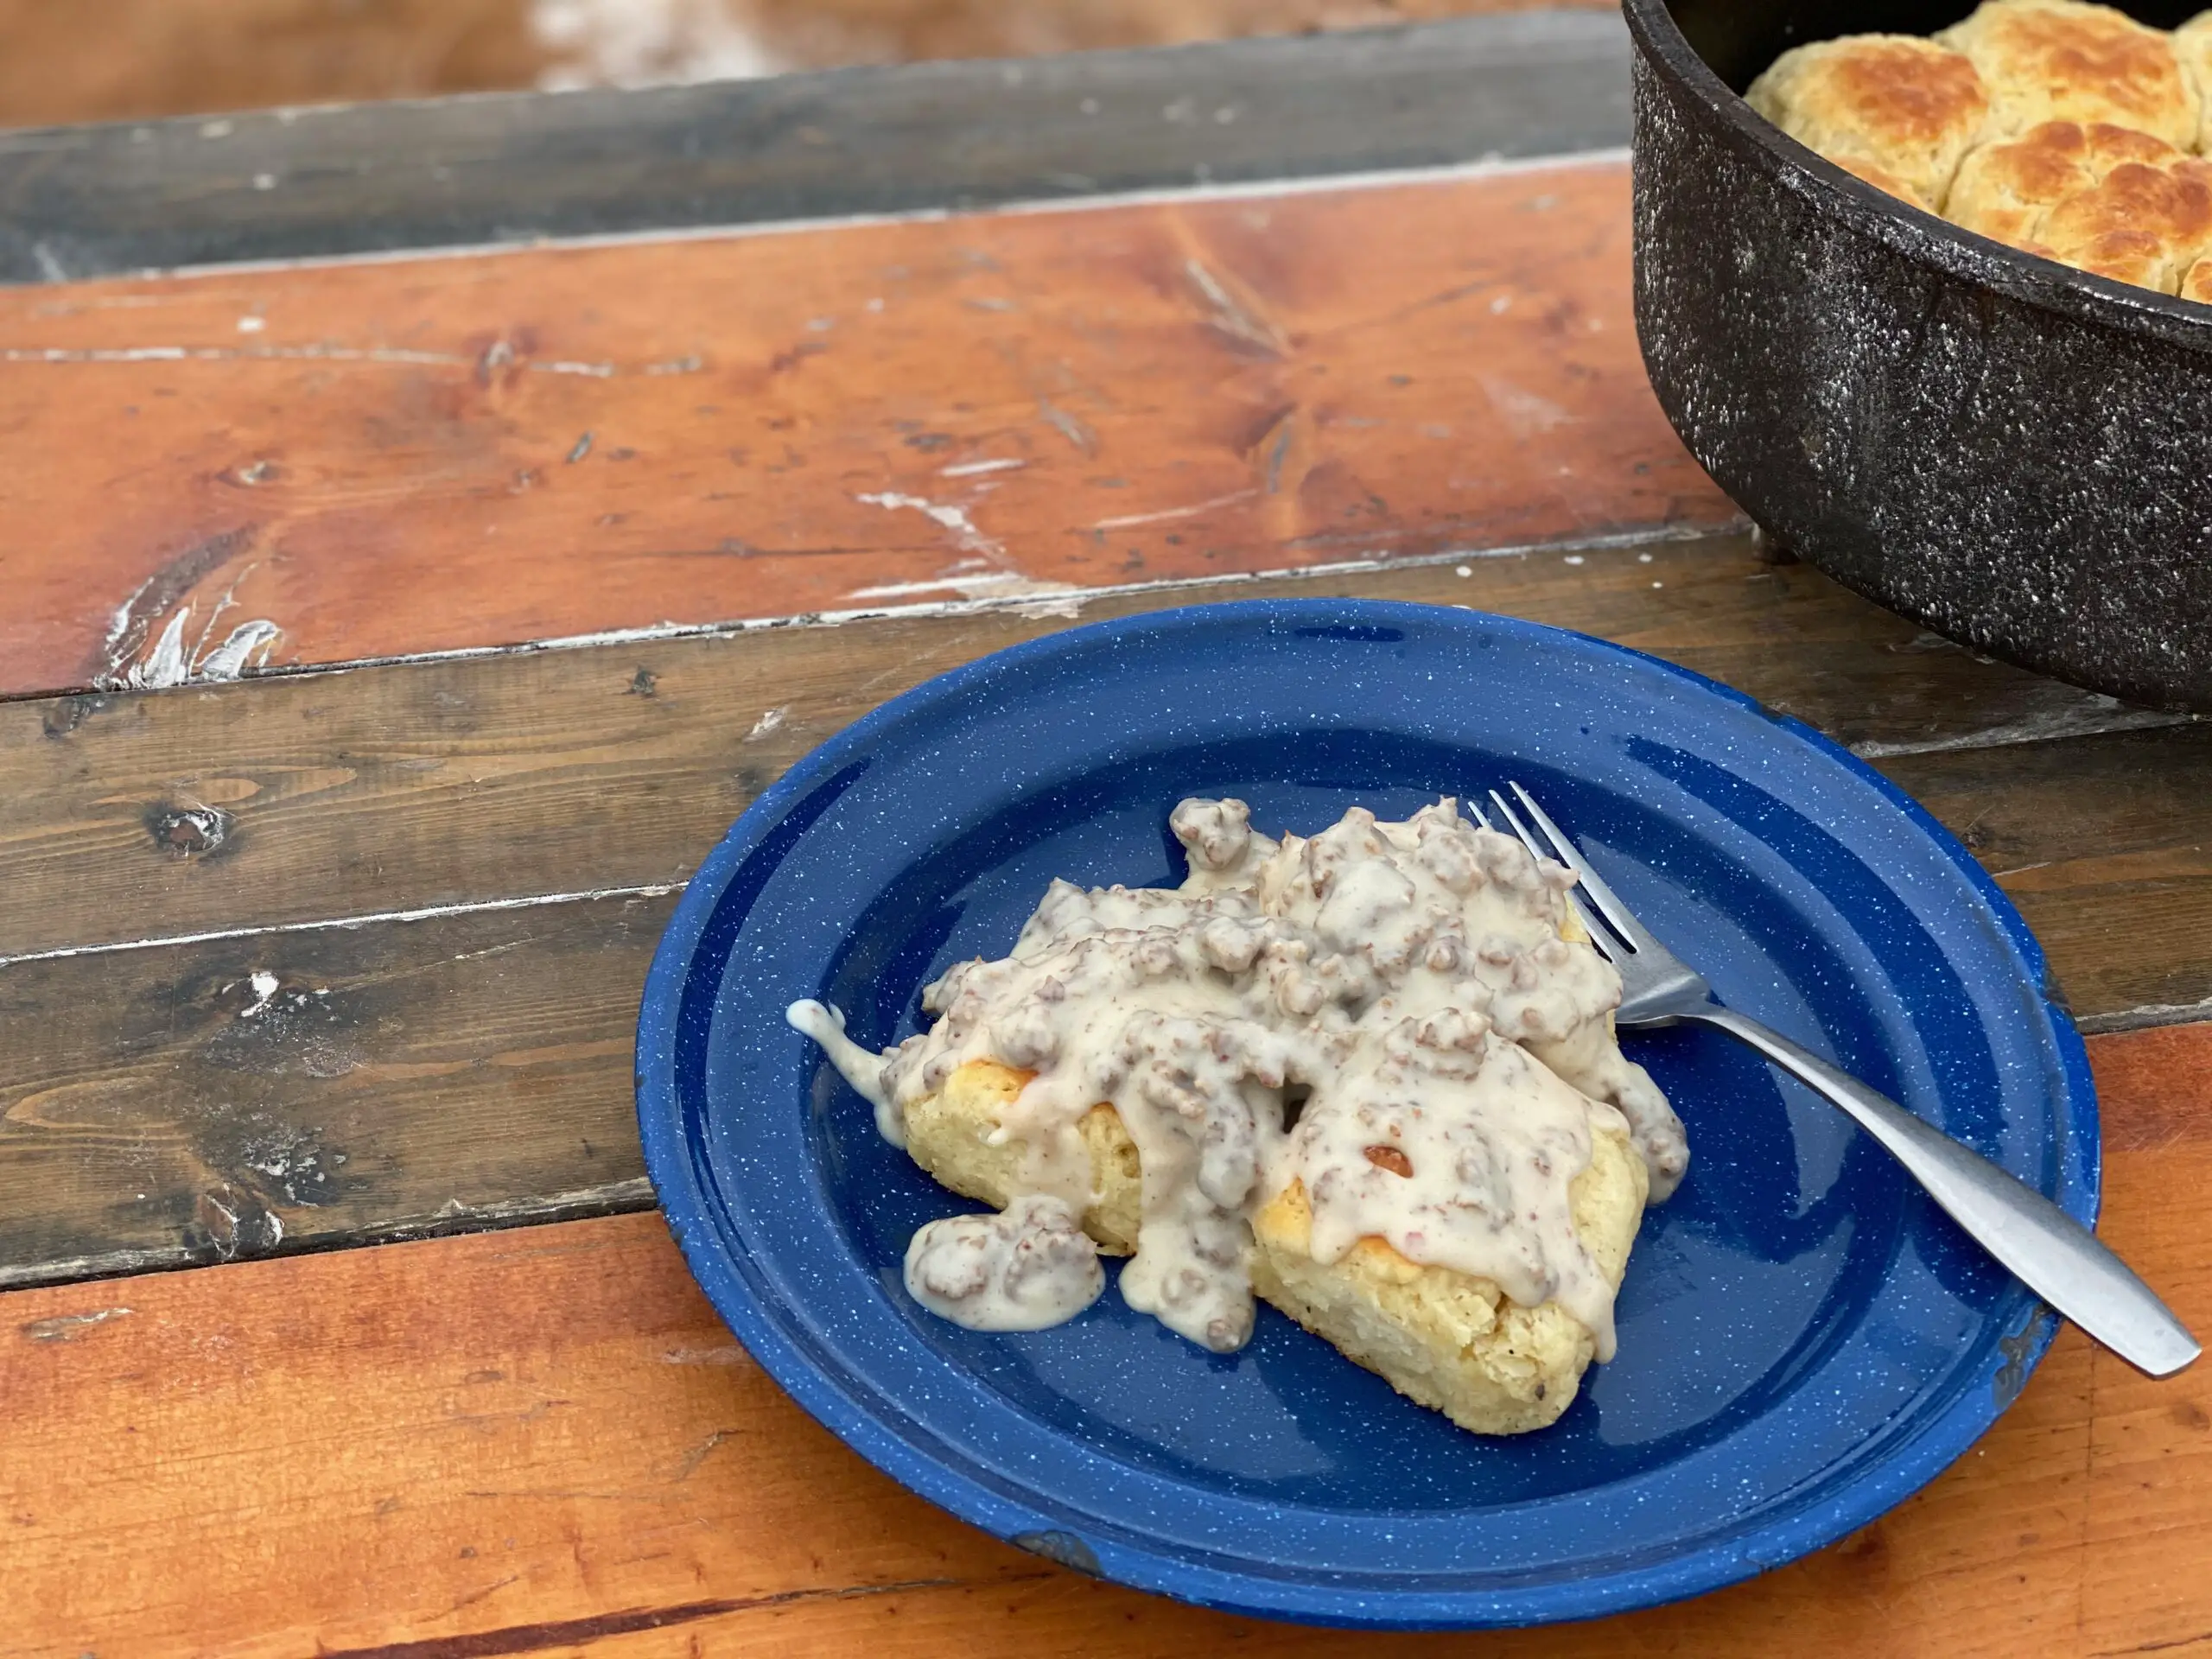 Cast Iron Biscuits And Gravy 